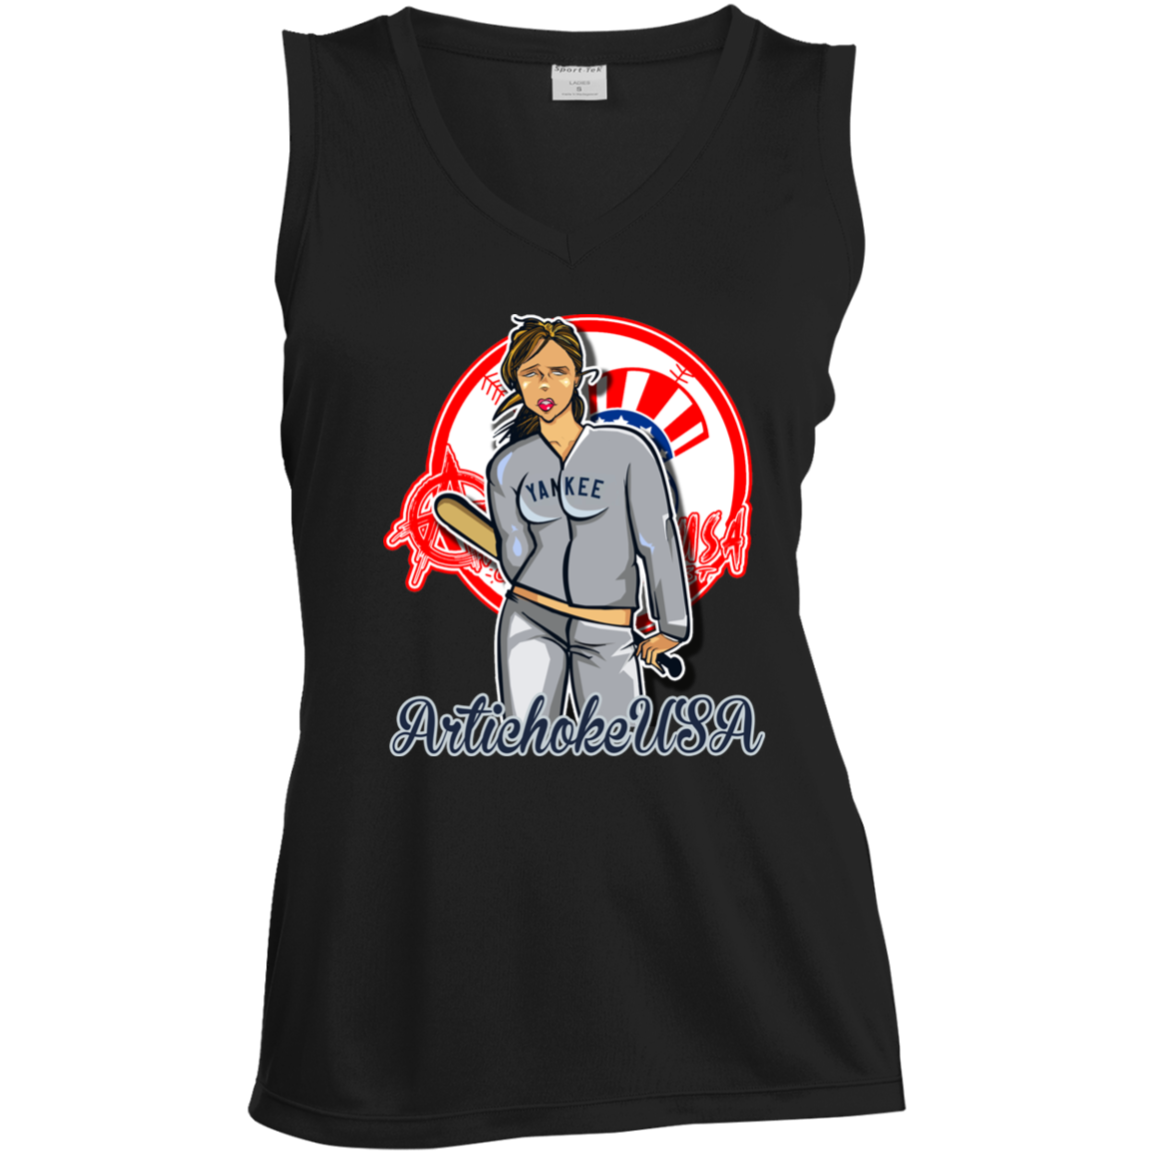 ArtichokeUSA Character and Font Design. Let’s Create Your Own Design Today. Brooklyn. Ladies' Sleeveless V-Neck